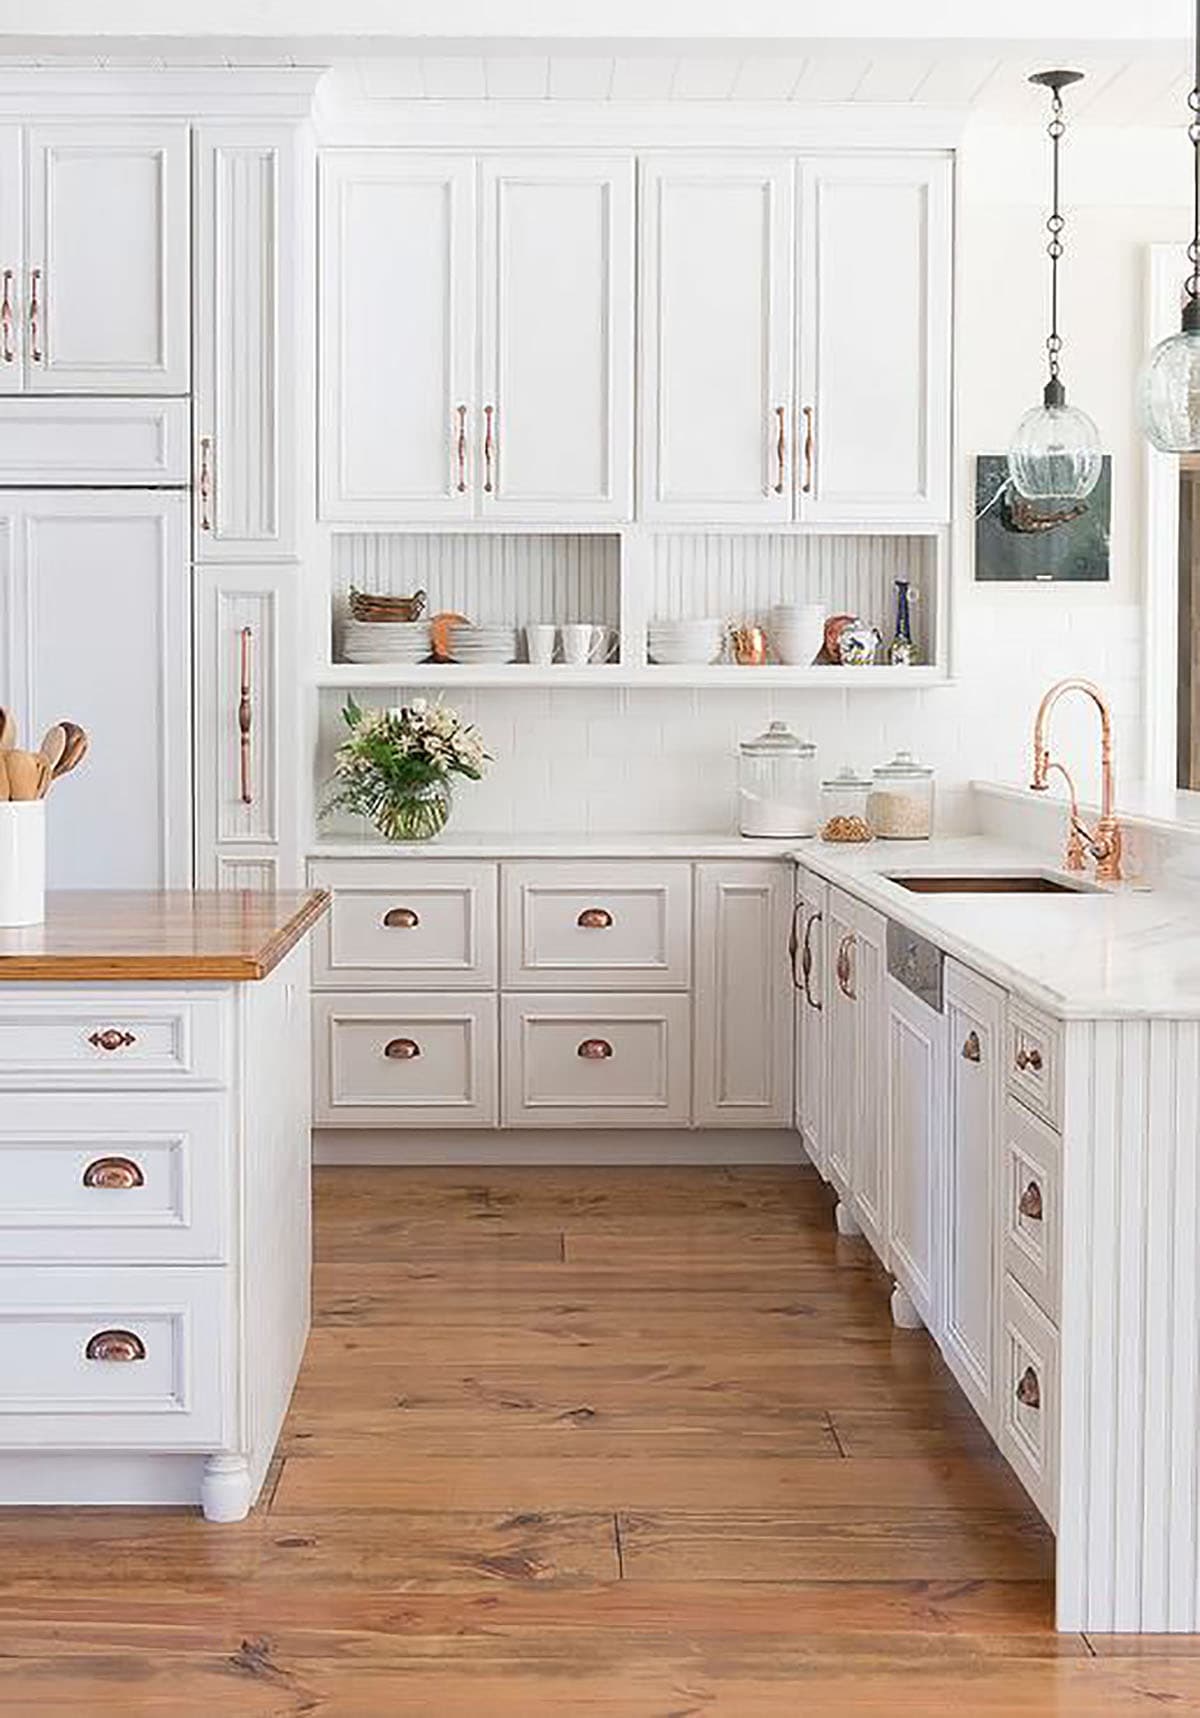 5 Kitchens That Inspire